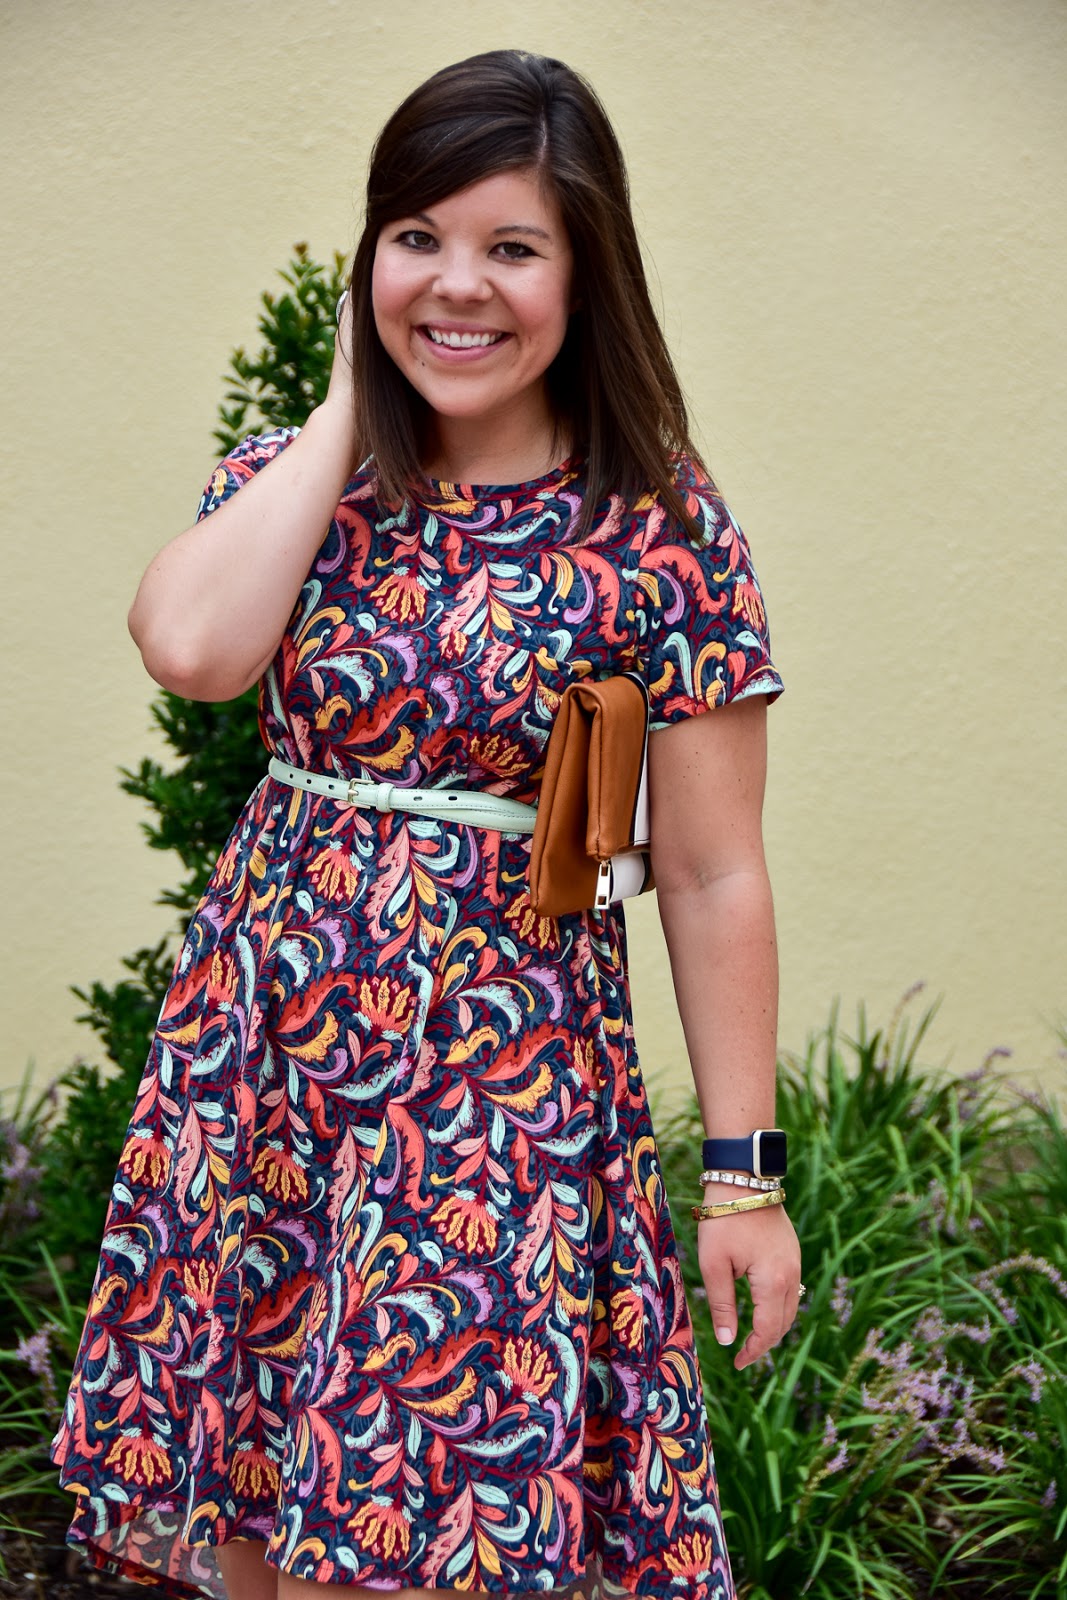 LuLaRoe Carly dress styled with and with out a belt, stylish and